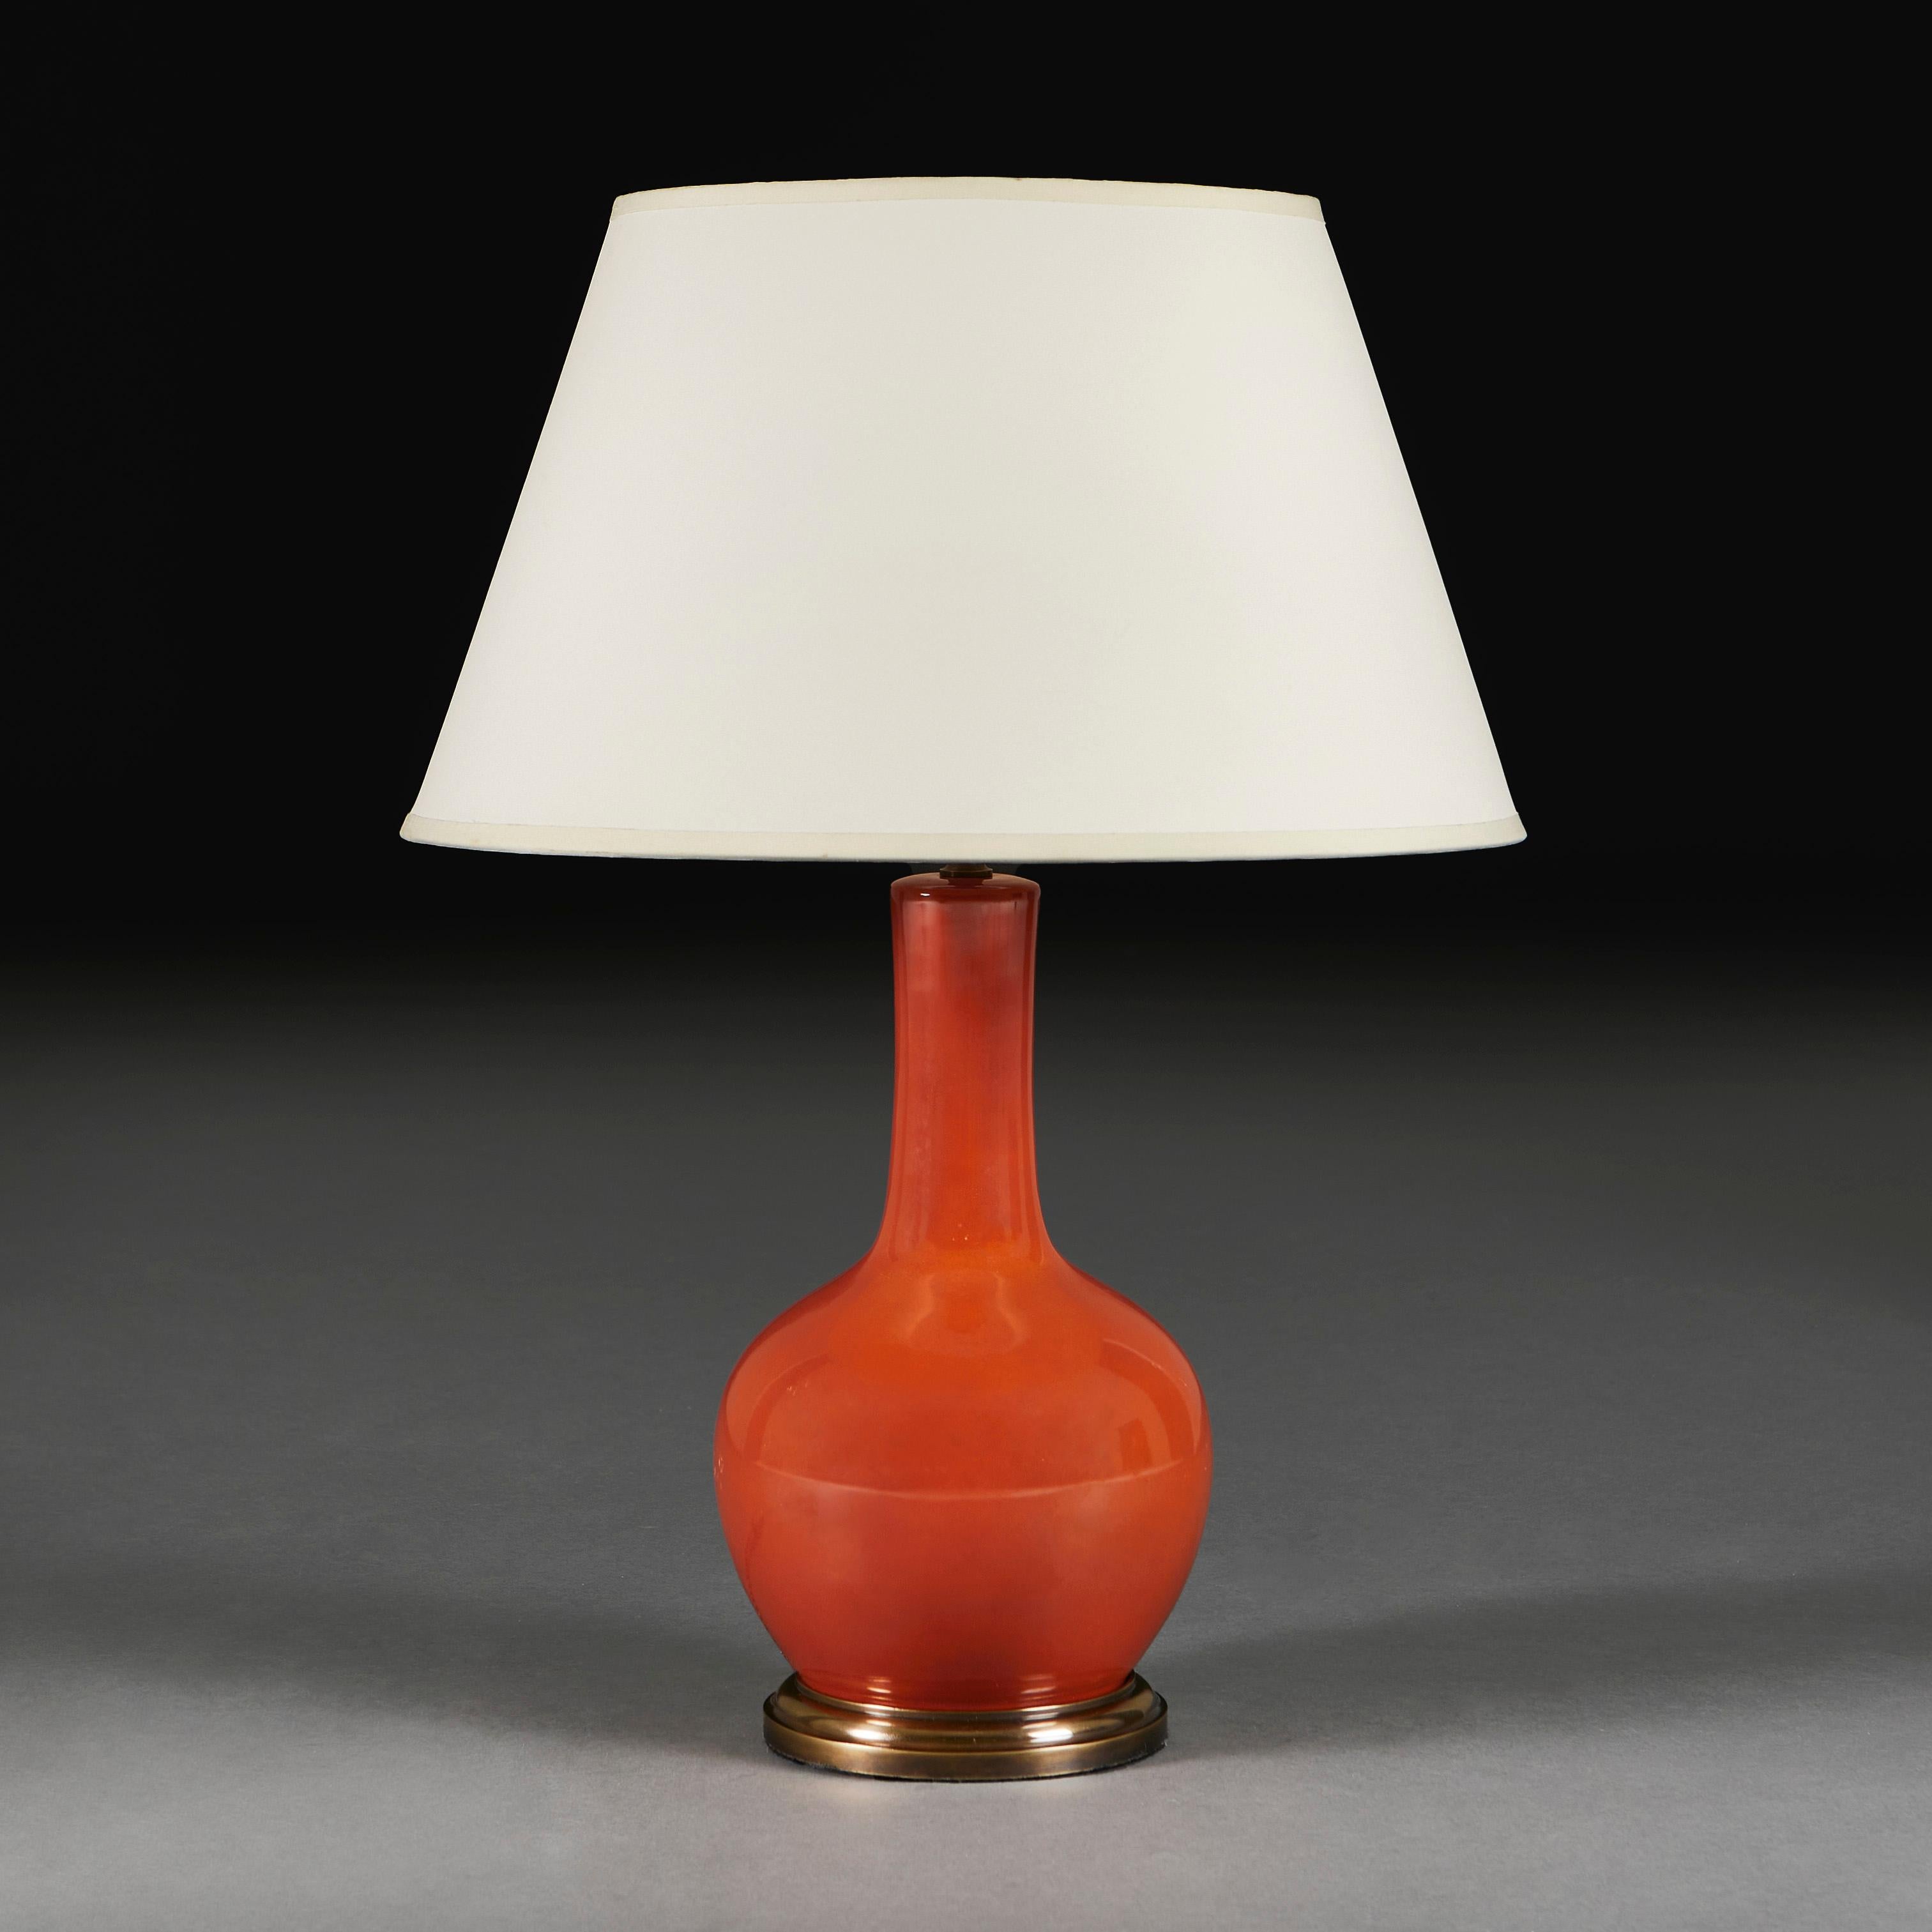 China, circa 1940

A twentieth century Chinese monochrome vase with red umber glaze, of bottle form, now mounted as a lamp on a turned patinated brass base.

Height of vase   32.00cm
Height with lampshade    57.00cm
Diameter of base  